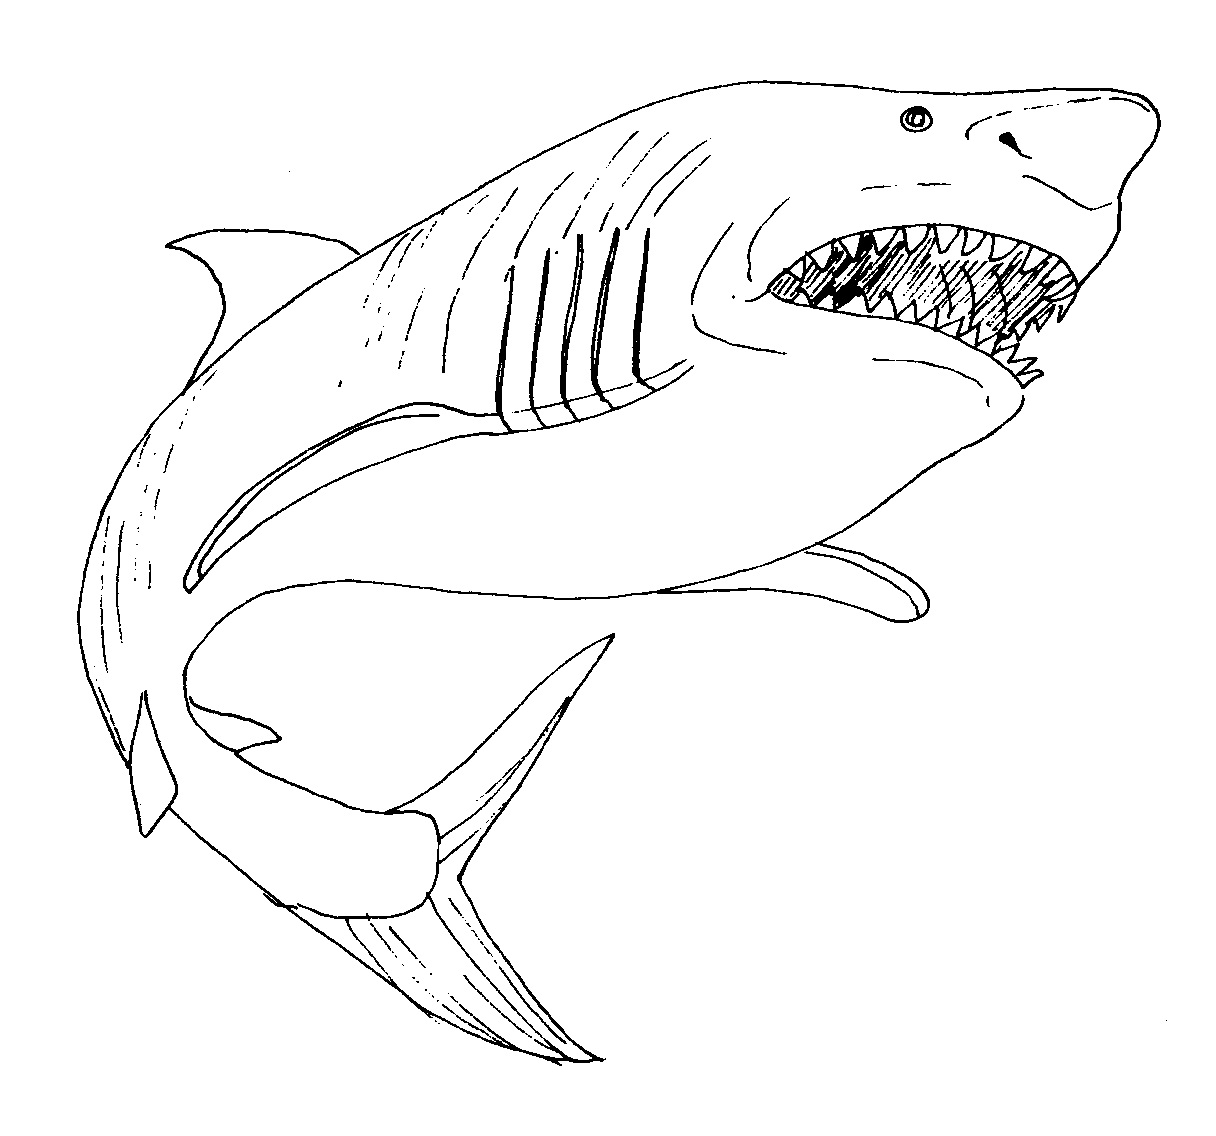 Shark coloring page 4